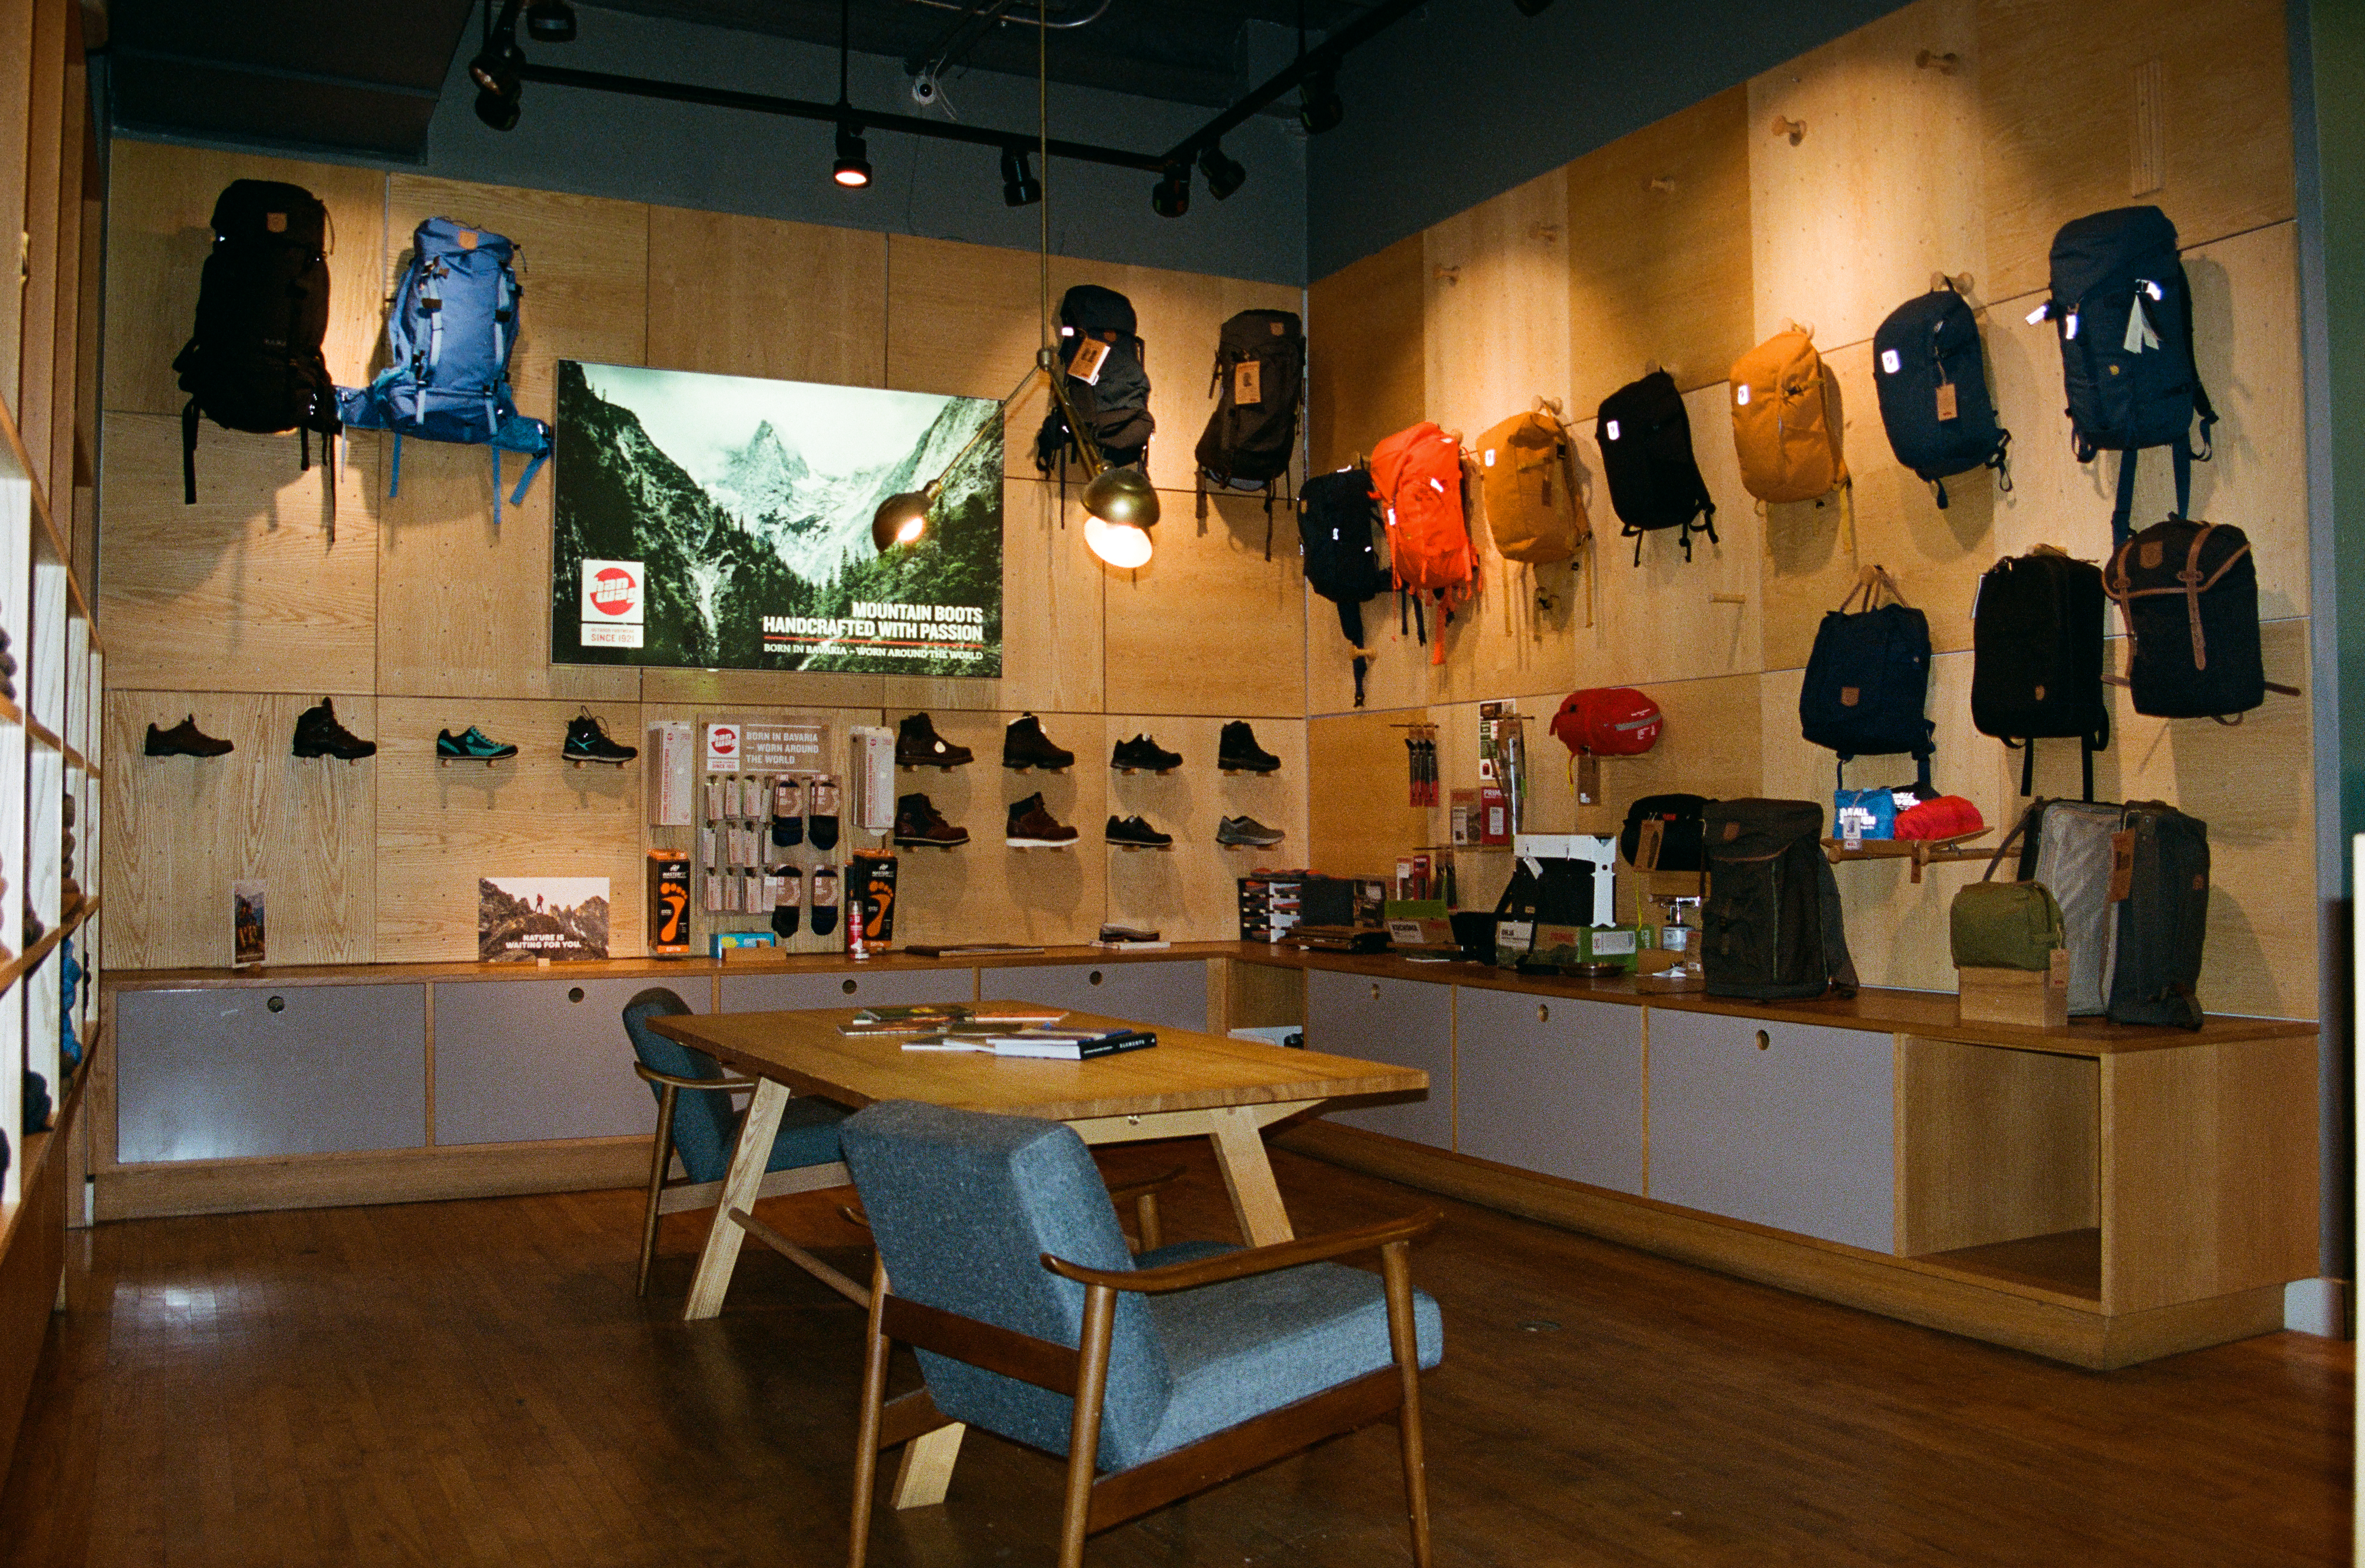 Fjallraven retailer in Ny, New York Store pic 3